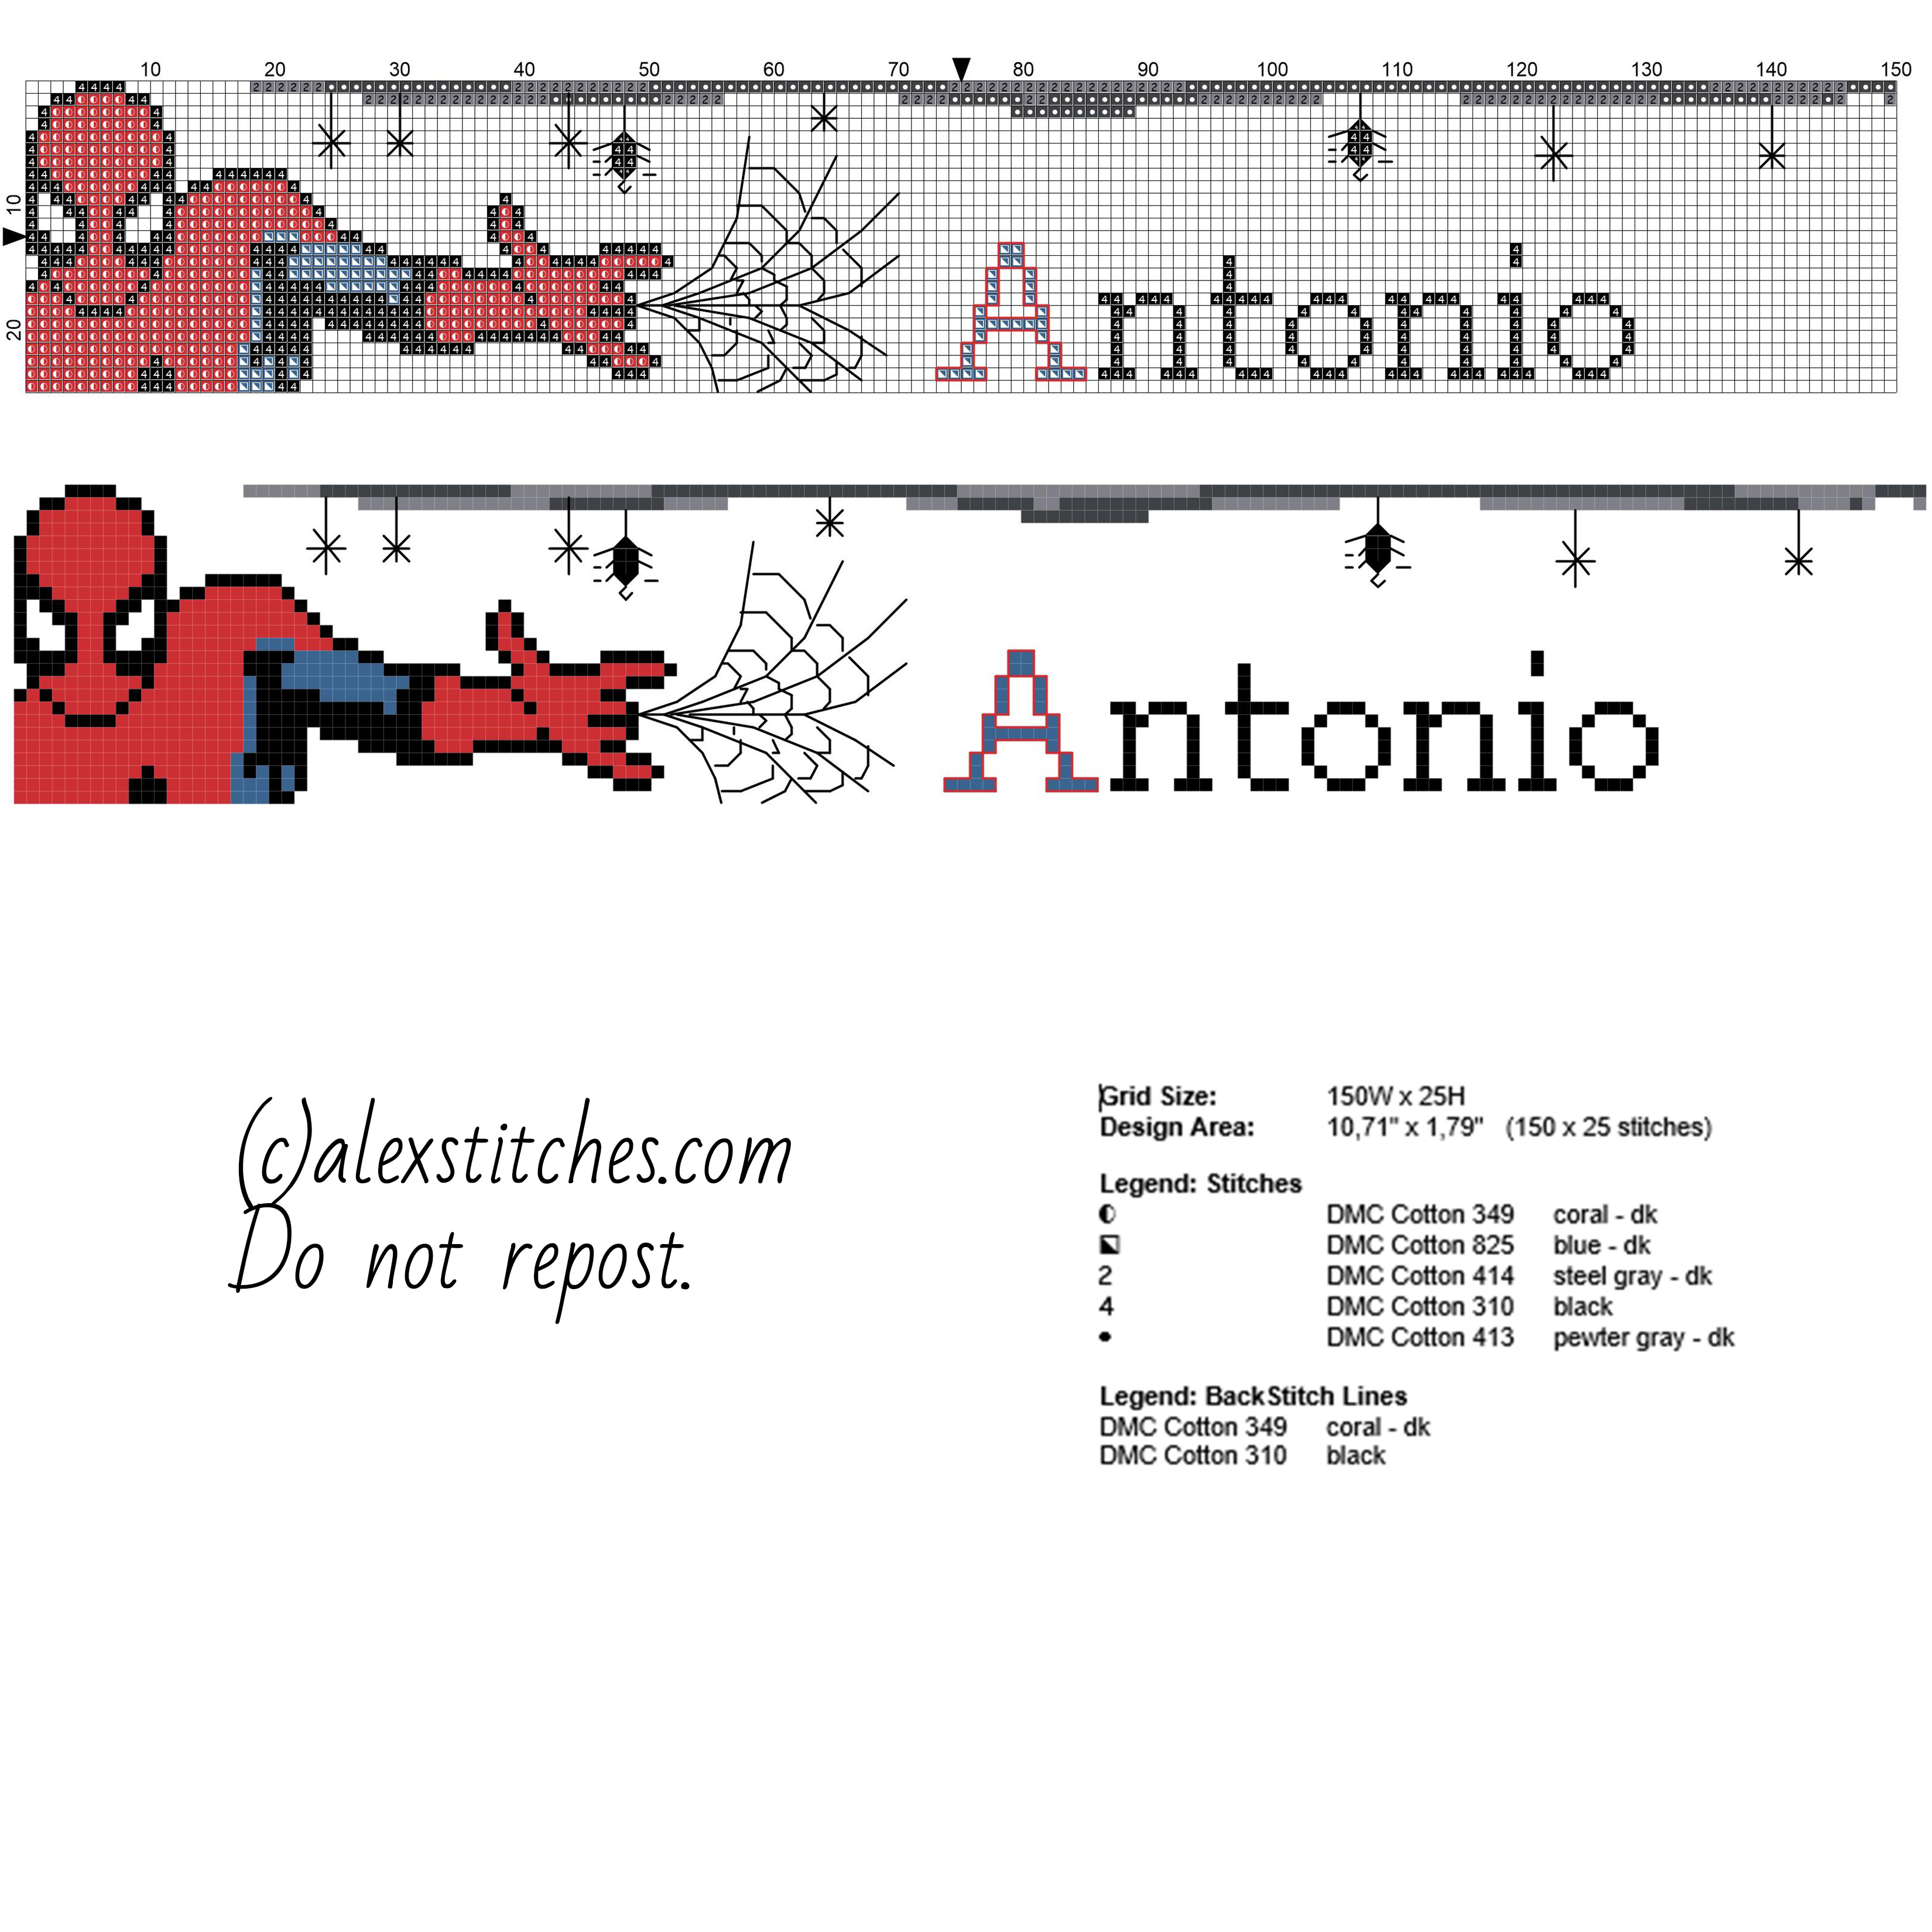 Antonio cross stitch baby male name with Spider Man